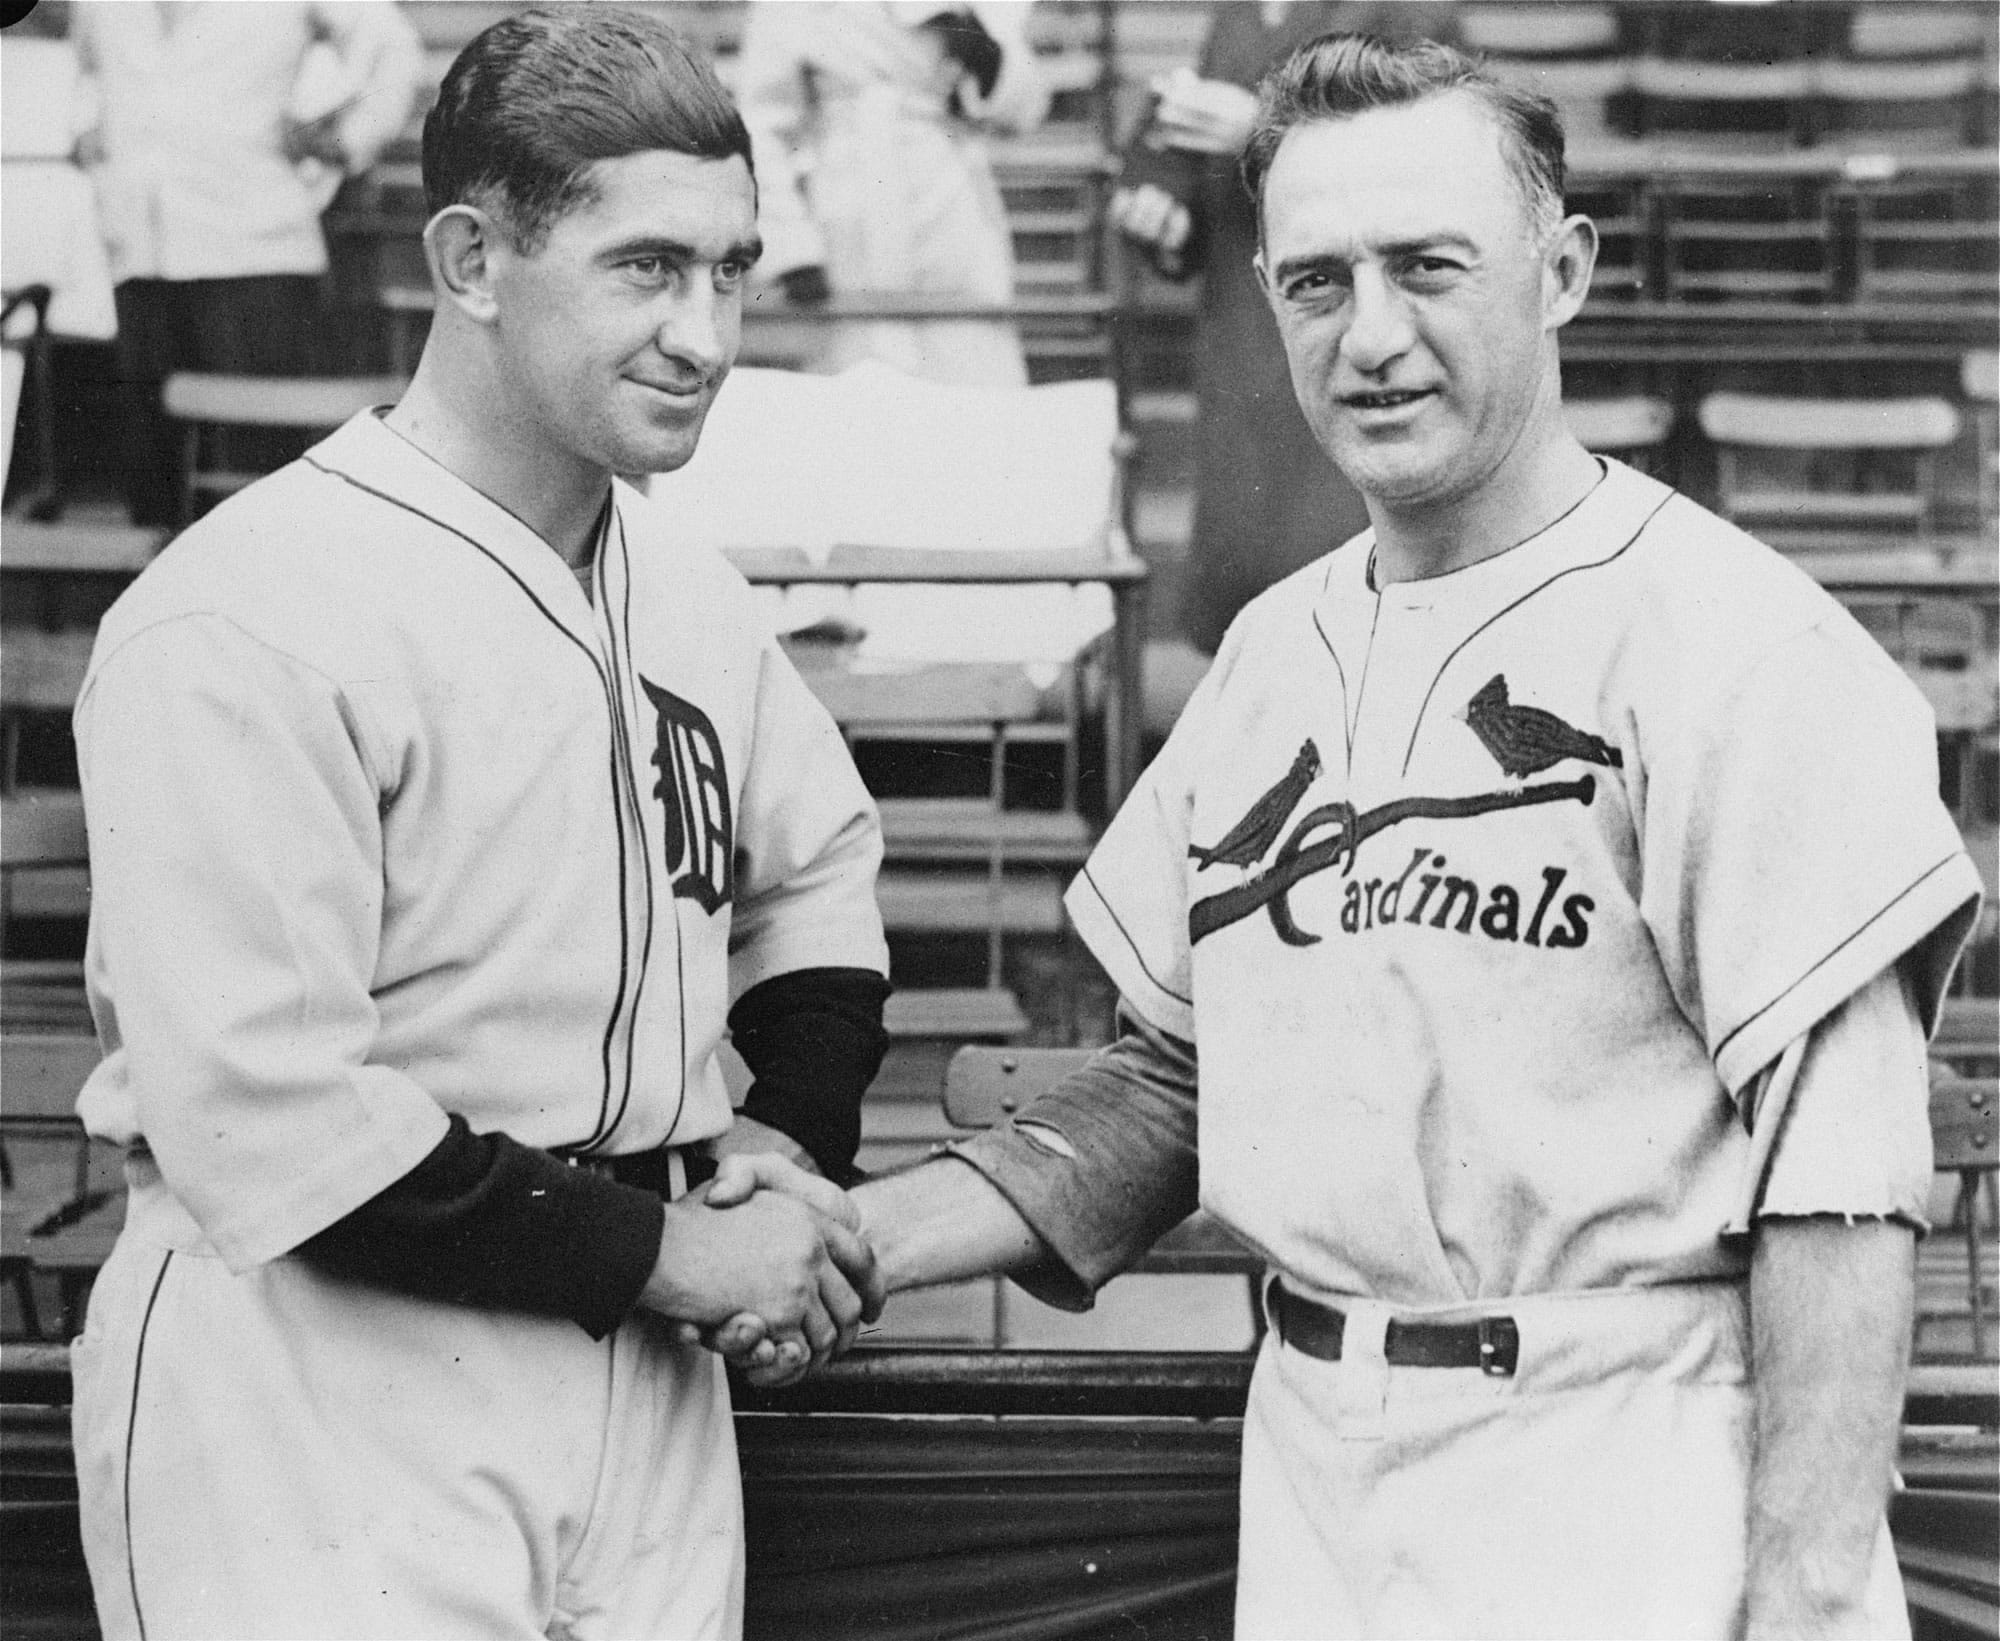 Associated Press
Detroit Tigers manager Mickey Cochrane, left, and St. Louis Cardinals manager Frankie Frisch shake hands Oct. 3, 1934 before the start of the opening game of the World Series in Detroit. The classic &quot;birds on a bat&quot; logo sported by Carlos Beltran and his St. Louis teammates, the Olde English &quot;D&quot; worn by Miguel Cabrera and his Detroit pals -- find a picture from the 1934 World Series between those teams and you'll recognize the jerseys.